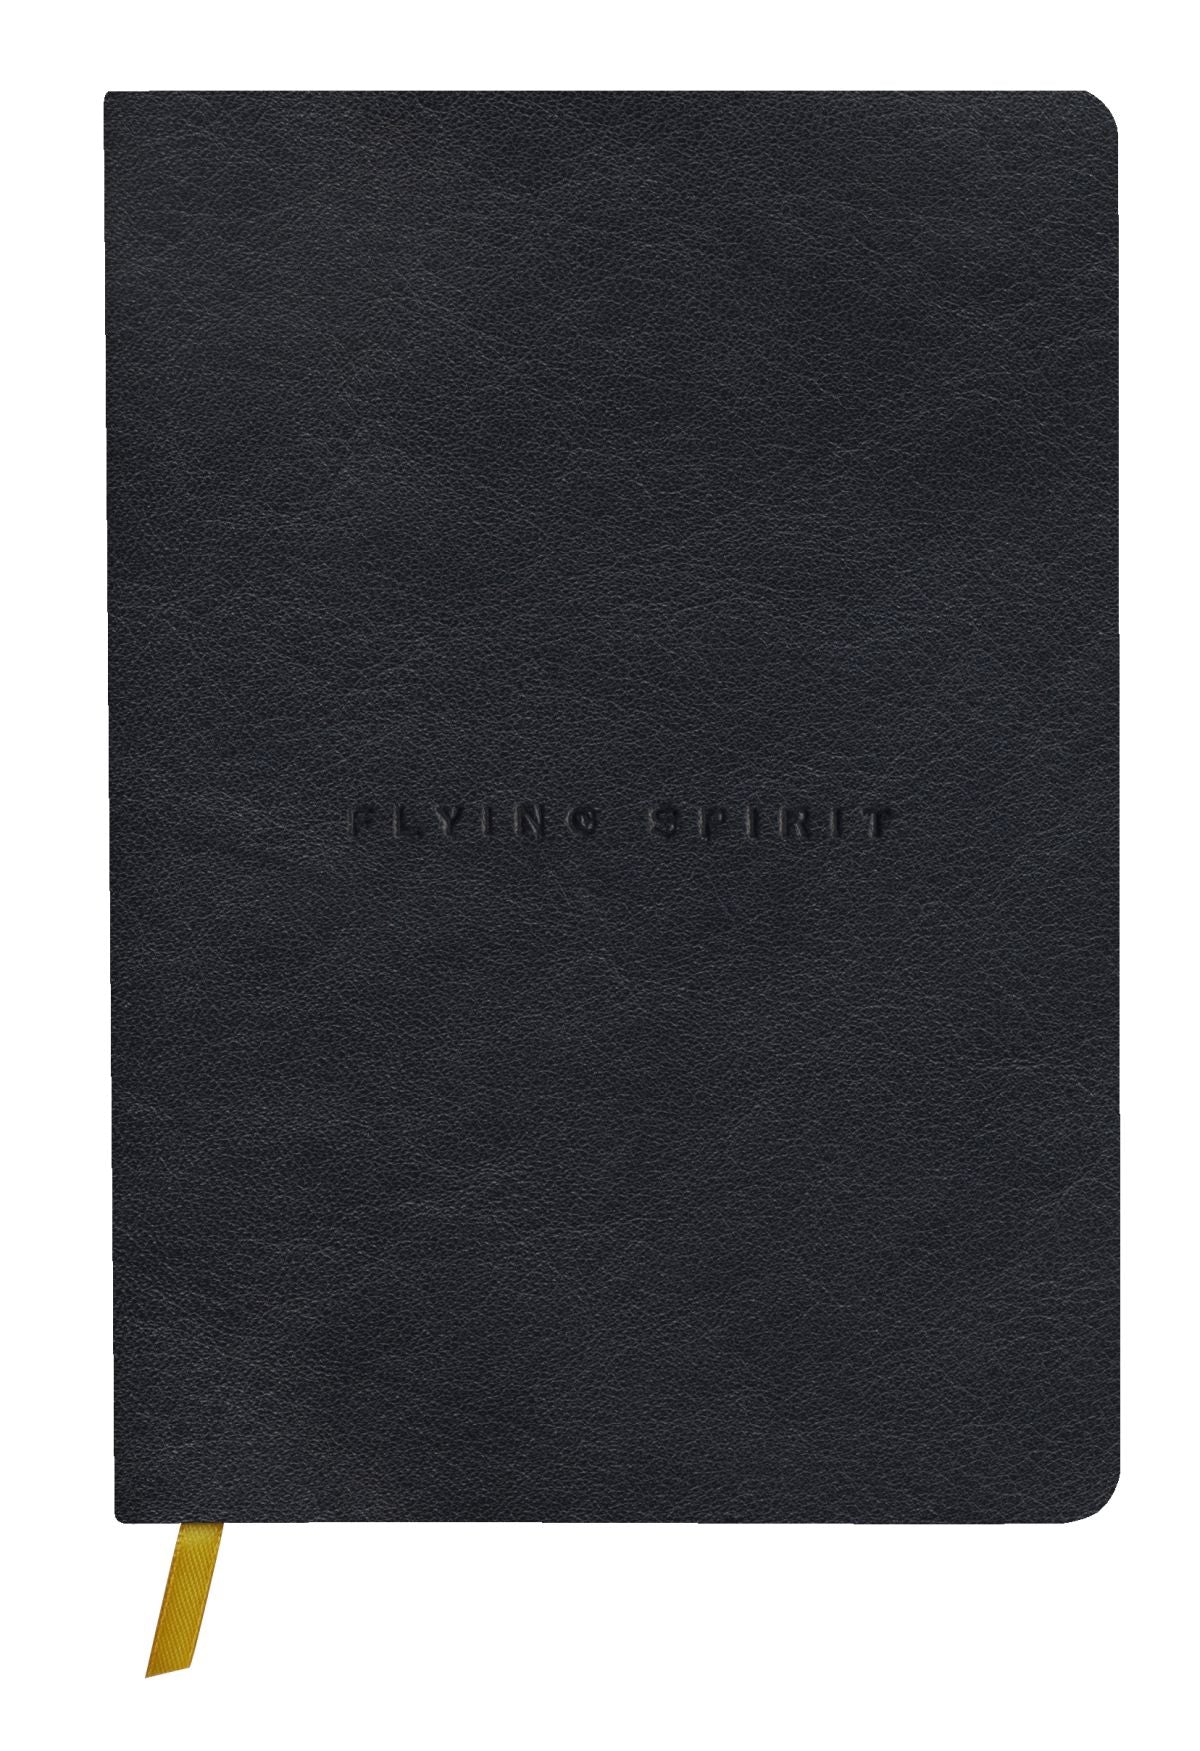 Flying Spirit notebook A5 with leather cover, black lined